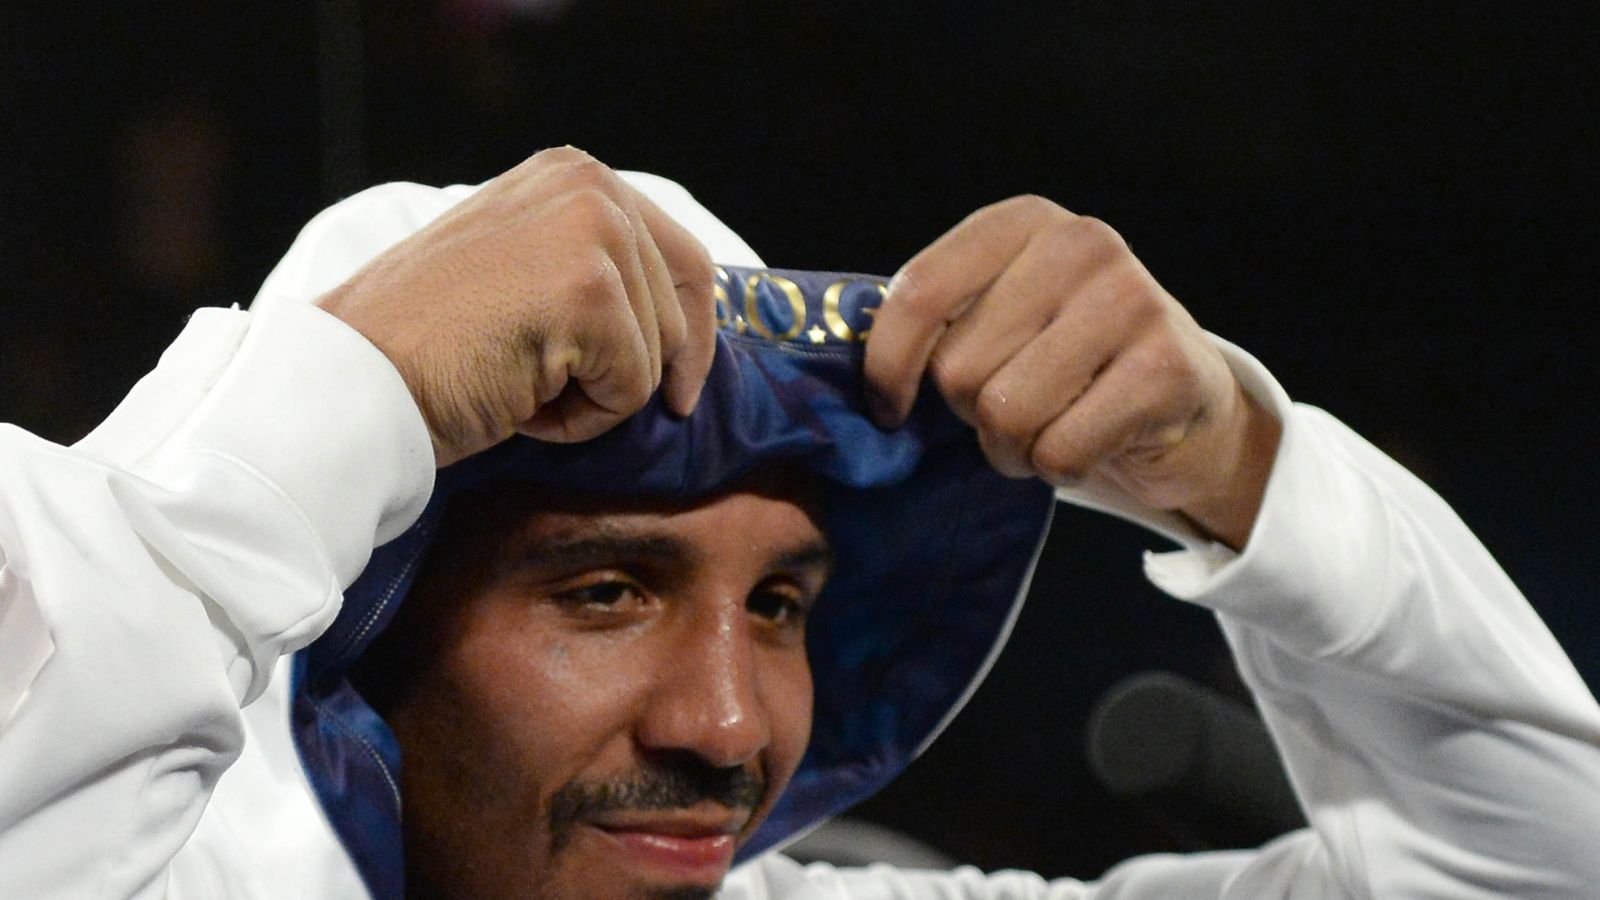 Andre Ward vs. Alexander Brand boxing fight purses are staggeringly  eye-opening | BJPenn.com